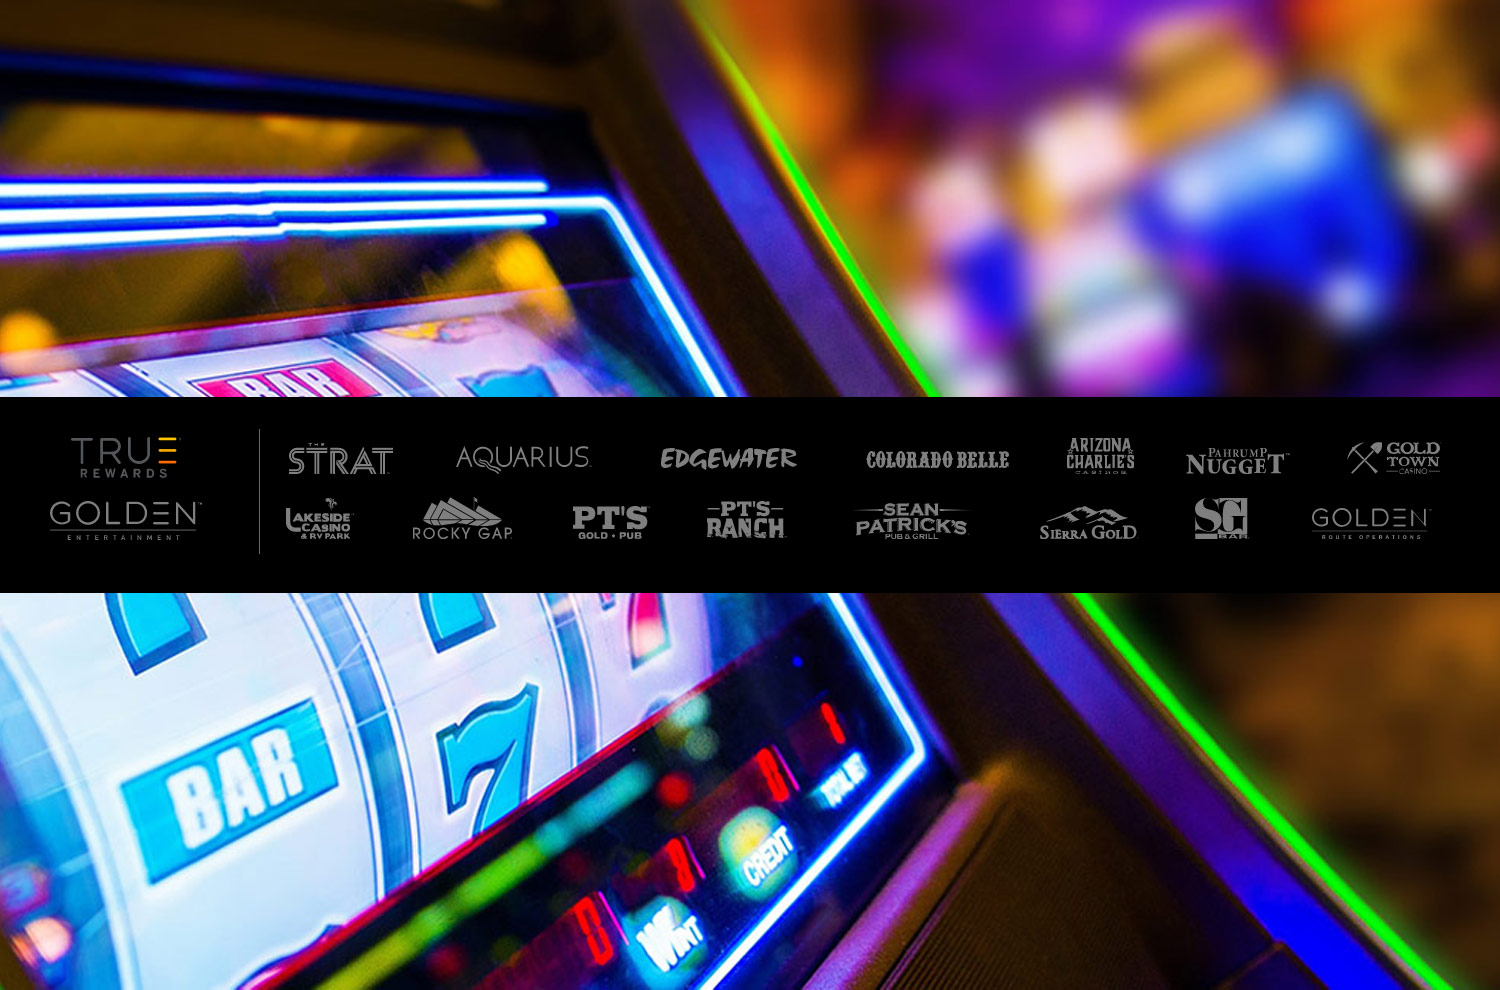 Image of Slot machine with Golden Entertainment logos